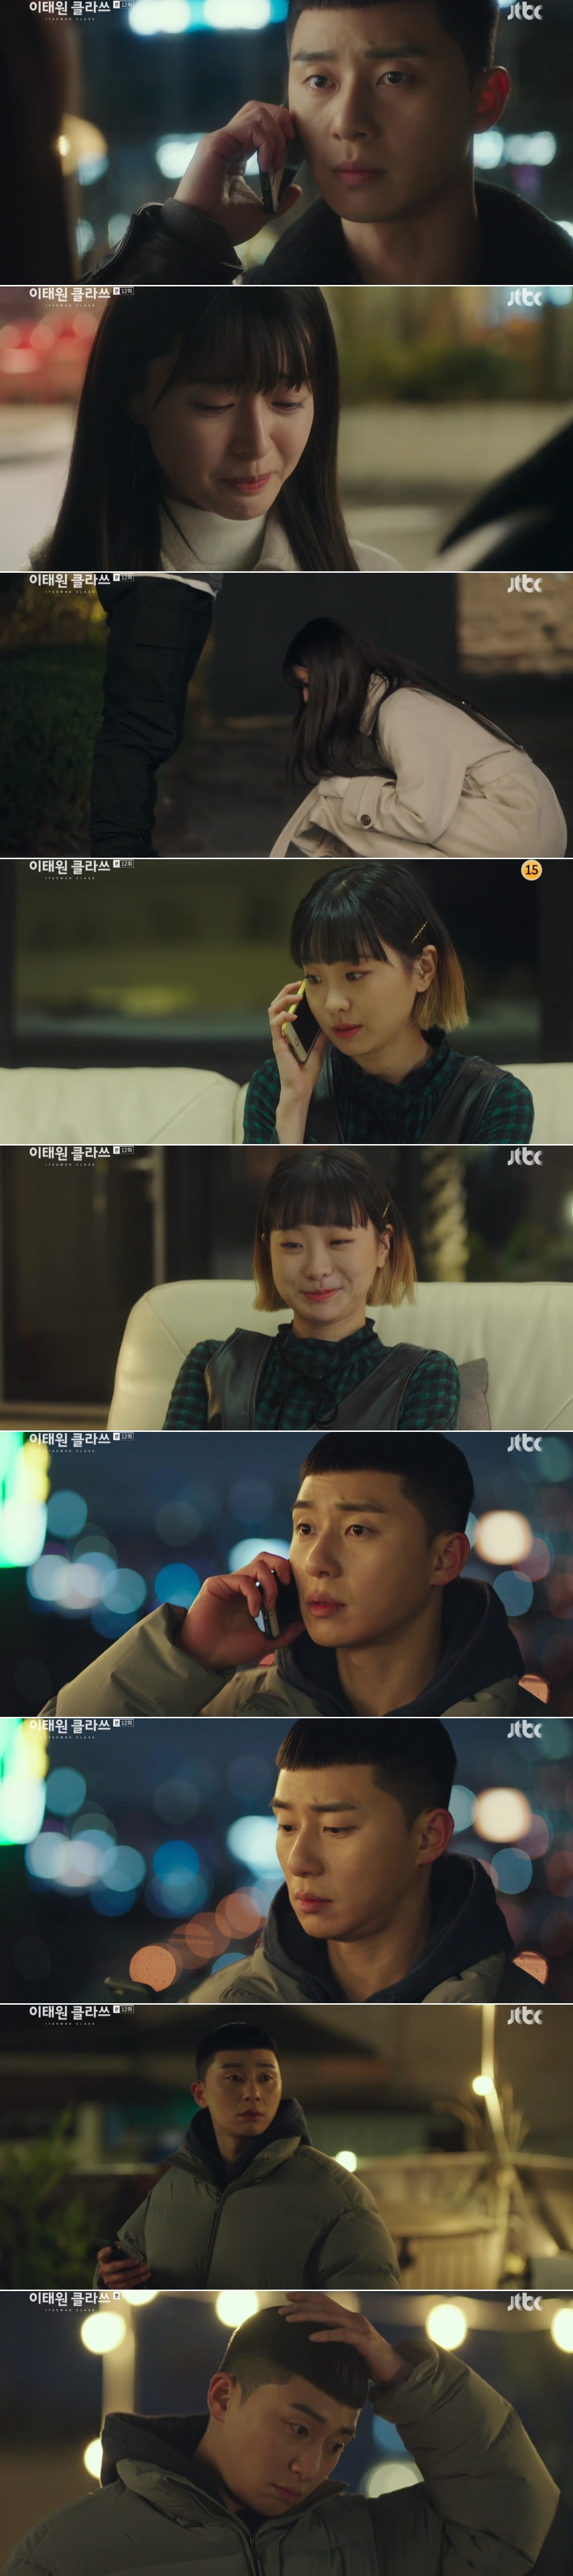 Seoul = = Itaewon Klath Kim Da-mi still showed active love despite being rejected once after confessing Kokoro to Park Seo-joon.Park Seo-joon has shown Kwon Nara a straight love without shaking, but Kim Da-mi is seen shaking and has raised questions about what changes will happen in the relationship of the three people.JTBCs Itaewon Klath (director Kim Sung-yoon, playwright Cho Kwang-jin) aired on the afternoon of the 7th depicted Park Sae-ro-yi (Park Seo-joon) shaking to Joe-yool Lee (Kim Da-mi).The brand celebration meeting was a mess as the investment of 10 billion won of Sanbam was withdrawn.In protest of the owners, Oh Soo-ah (Kwon Nara) appeared with a wreath sent by Jang Dae-hee (Yoo Jae-myeong) of Jangga.Park Sae-ro-yi checked the message on the wreath with the word Anbundji and was angry after he realized that Jang Dae-hee was the one who set up all these schemes.Oh Soo-ah told Park Sae-ro-yi, who is going to secure the building, You cant just stop, you keep getting hurt and sick.You know what my Kokoro was like when you brought that pot? How long do I have to do this to you. You said.Revenge for the house, hate, and come to me. Lets be happy. Then, when I heard about the withdrawal of the investment, Joe-yool Lee called and Park Sae-ro-yi received a call.Park Sae-ro-yi told Joe-yool Lee, Im sorry for being rude to work, who decided on that, Im the representative, dont carry all of it.Hes a man who wants to be a life-savvy man. Trust me. Im not this broken. This is nothing.The real big thing is when my father was fired from work for 20 years.When my father died after a hit-and-run, and the death was covered up, I was able to get up again because I pledged revenge and before that I could not have my happiness.I will break down the house and I can not put it down or stop it before that. Oh Soo-ah, who was listening to it, sat down and cried.Park Sae-ro-yi met Joe-yool Lee and said, Thank you. Park Sae-ro-yi said, Are you okay now?I was wondering if it was a little bit, and Joe-yool Lee said, What sort of sort? Mr. Kokoro? I like it so crazy.I dont go to college. I work at night. I work for all the reasons. Kokoro is fine.Dont like it, Kokoro. Dont say that. My Kokoro is mine. Joe-yool Lee then headed to Jeju Island to meet Kim Soon-rye (Kim Mi-kyung) for an investment request.Park Sae-ro-yi called Joe-yool Lee and after a conversation with Kim, he received a promise to invest if he won the MiforceFoa.Joe-yool Lee said: You must win the Miniforce tomorrow, Ill make you feel good for your grandmother and then go up tomorrow evening.Good night, Park Sae-ro-yi said, but hesitated, saying, This is...Seo-yool Lee!Joe-yool Lee said to Park Sae-ro-yi, who says he is so sorry and thanked, I know, and hung up after saying, I love you. Good night. Im leaving.Park Sae-ro-yi, who heard this, looked embarrassed and embarrassed but did not like it, and raised expectations for changes in the relationship between the two in the future.